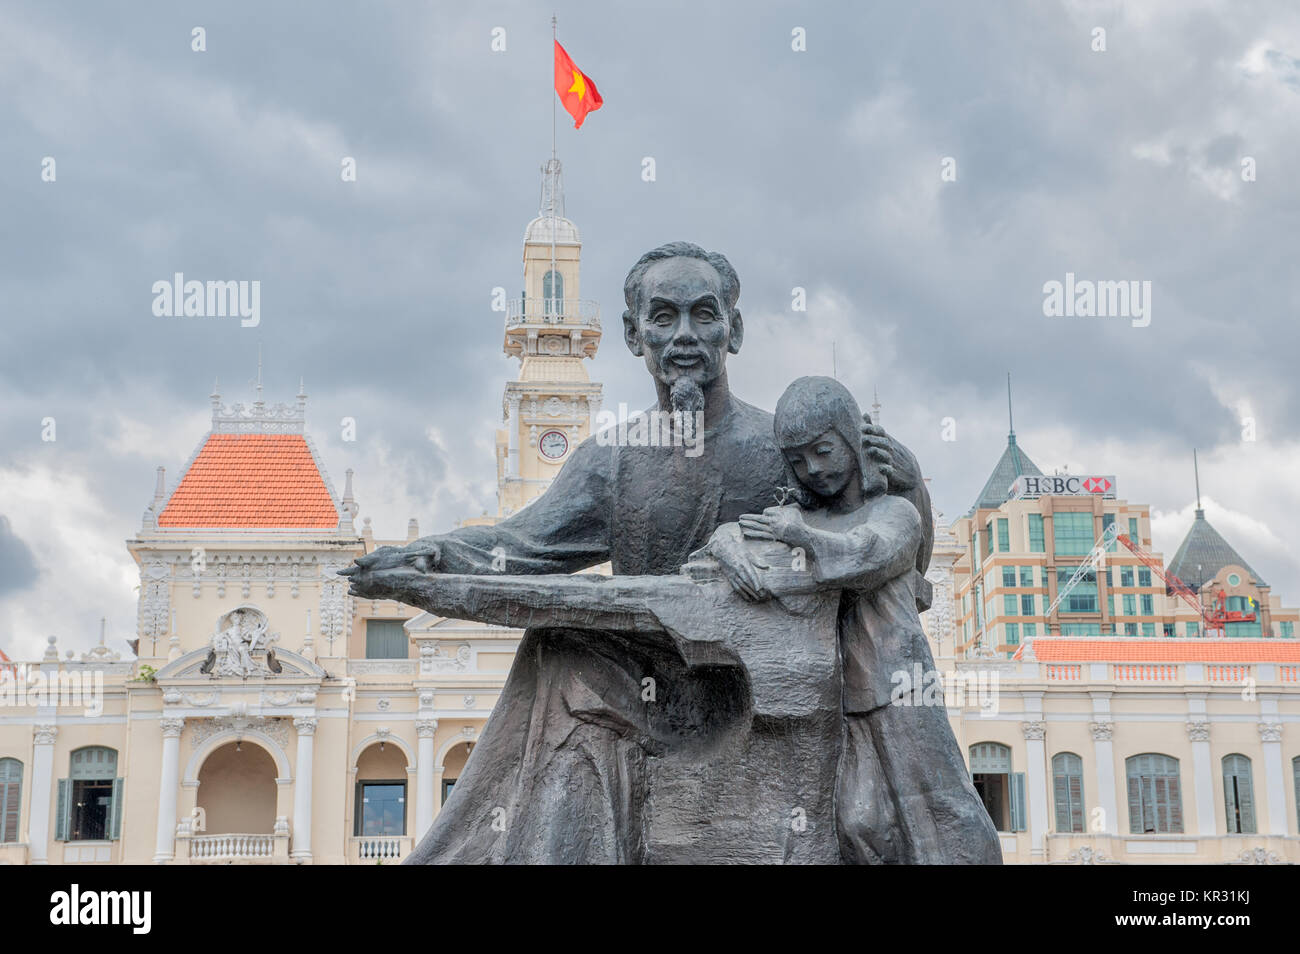 Statue of Ho Chi Minh in front of former Hotel de Ville.  Ho Chi Minh was prime minister of North Vietnam from 1954 – 1969. Stock Photo